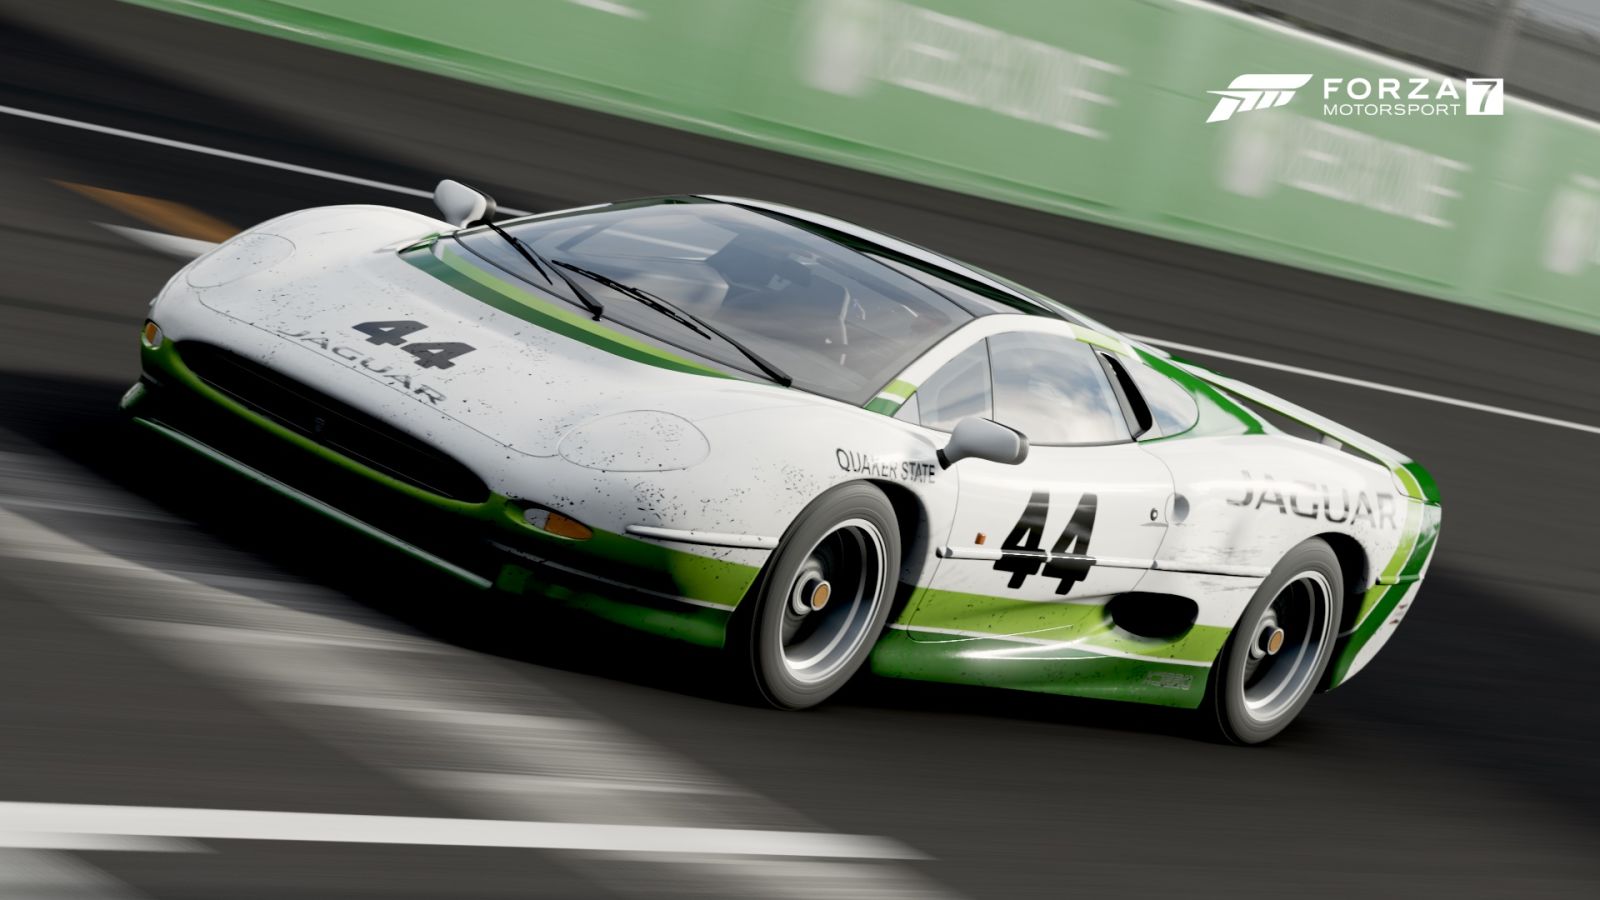 Illustration for article titled Forza Friday!!